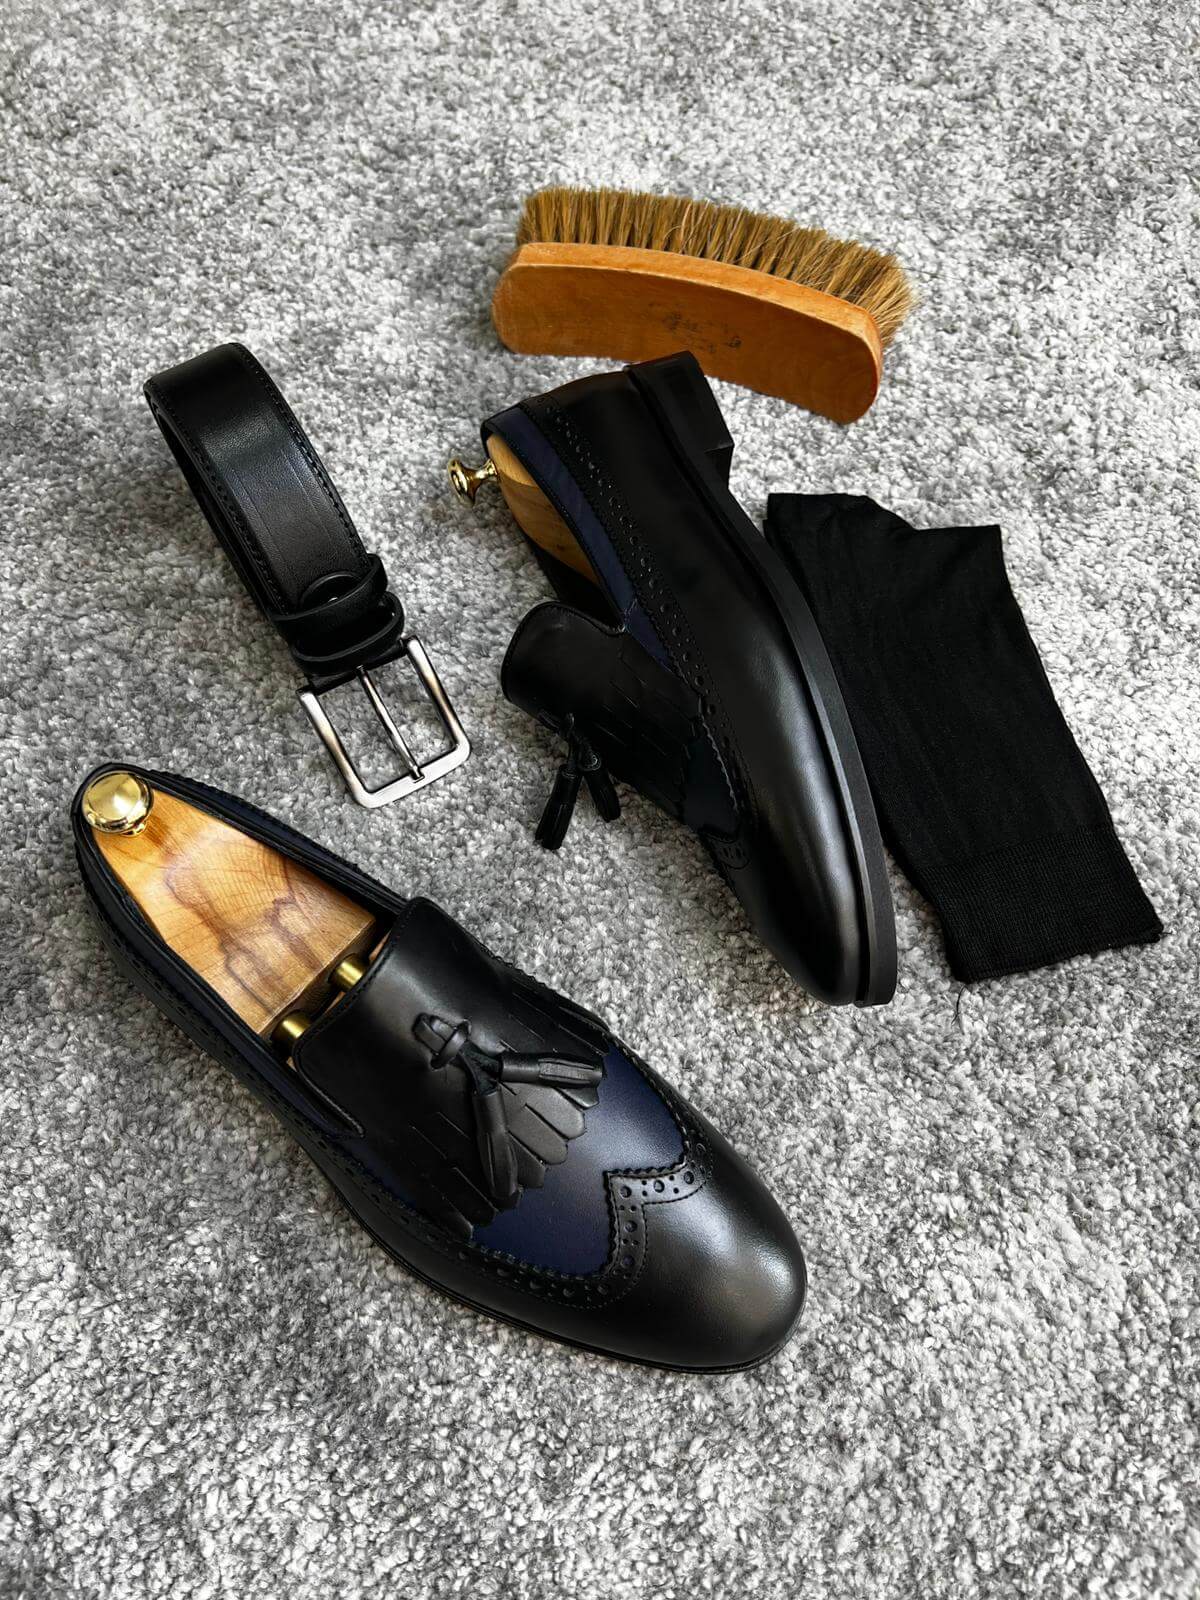 HolloShoe's black and navy blue tassel loafers, featuring 100% leather and neo-lite soles.'